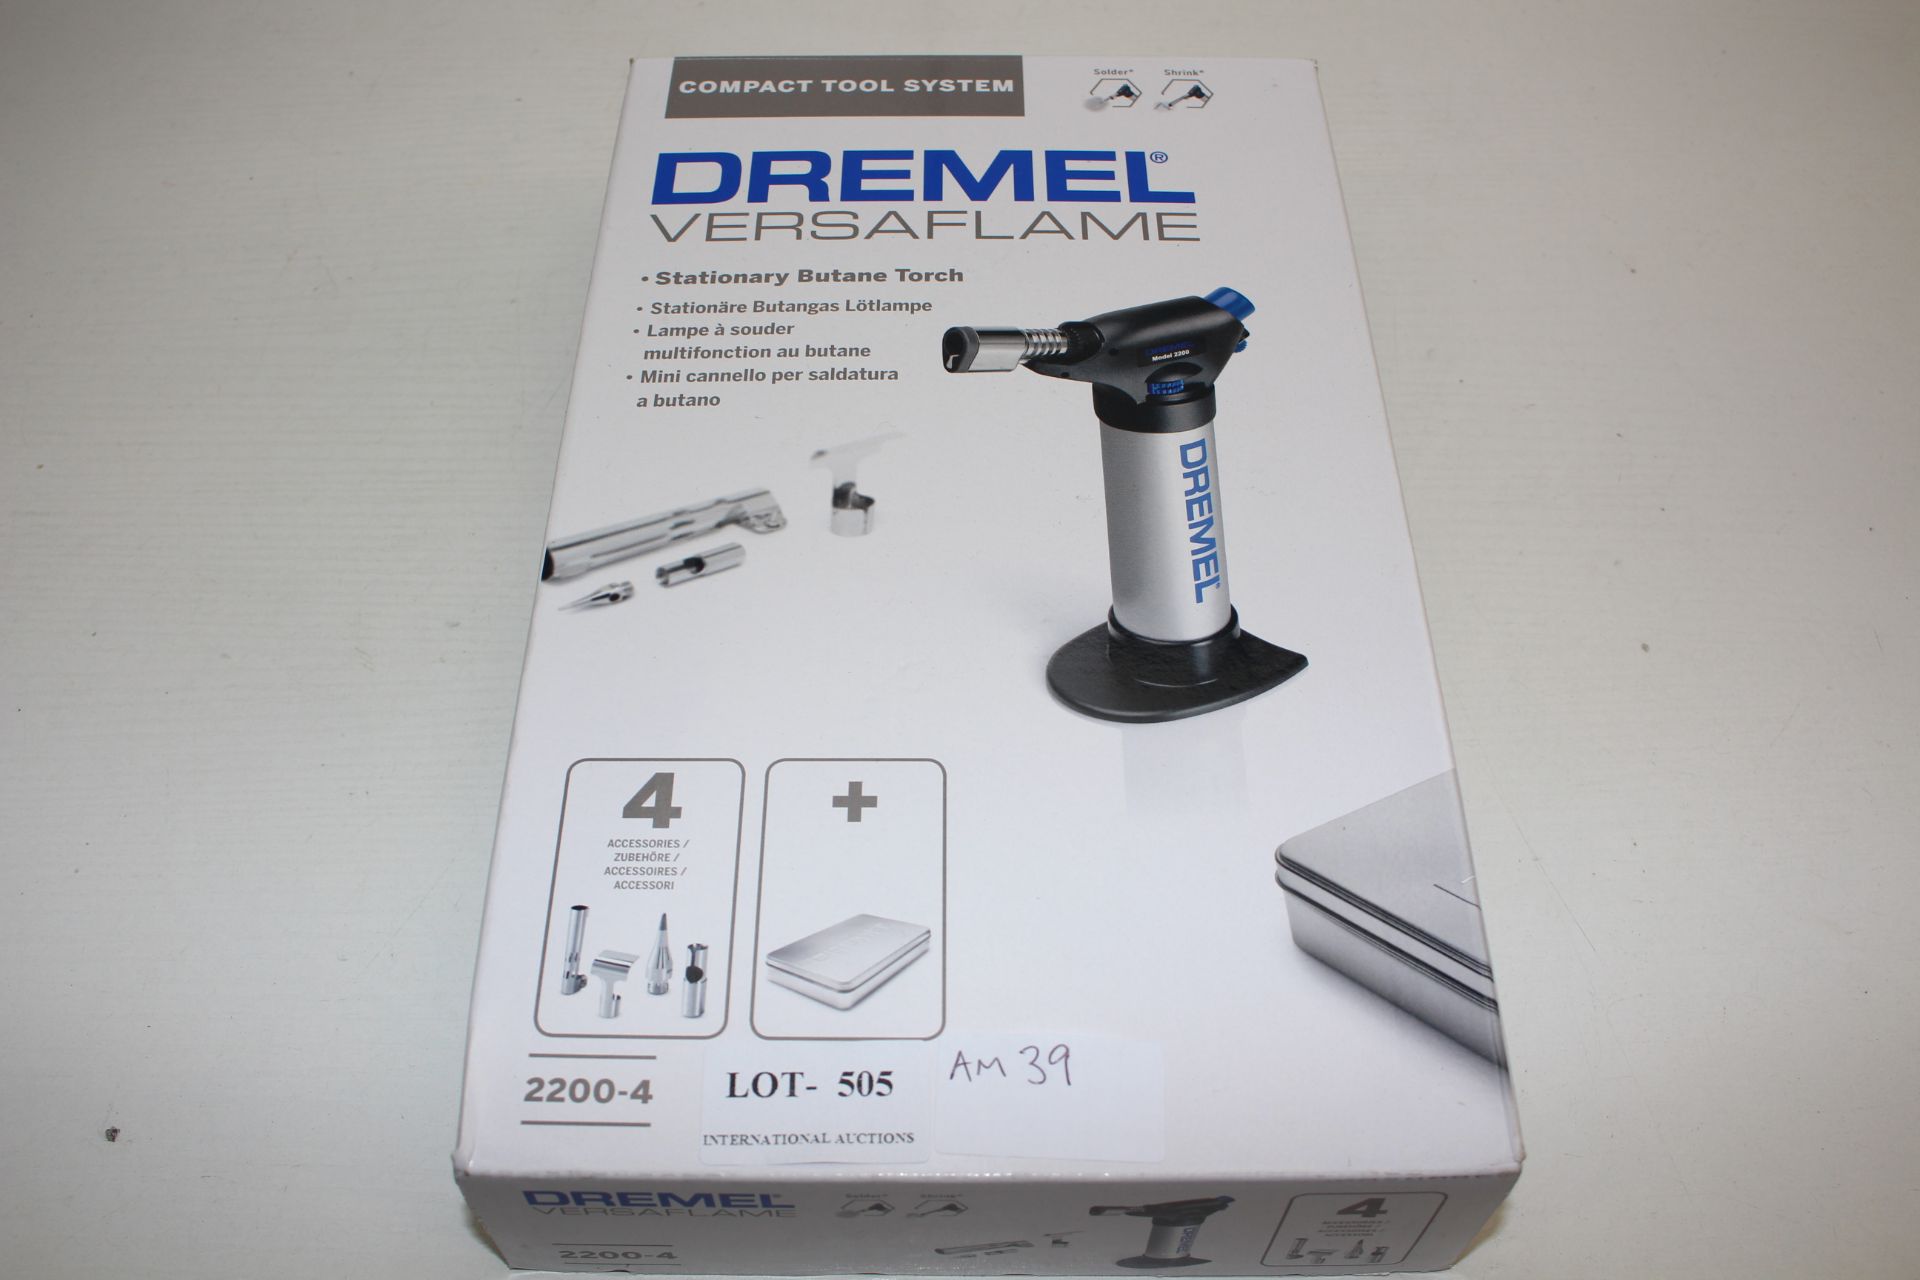 BOXED DREMMEL VERSAFLAME COMPACT TOOL SYSTEM 2200-4 RRP £37.97Condition ReportAppraisal Available on